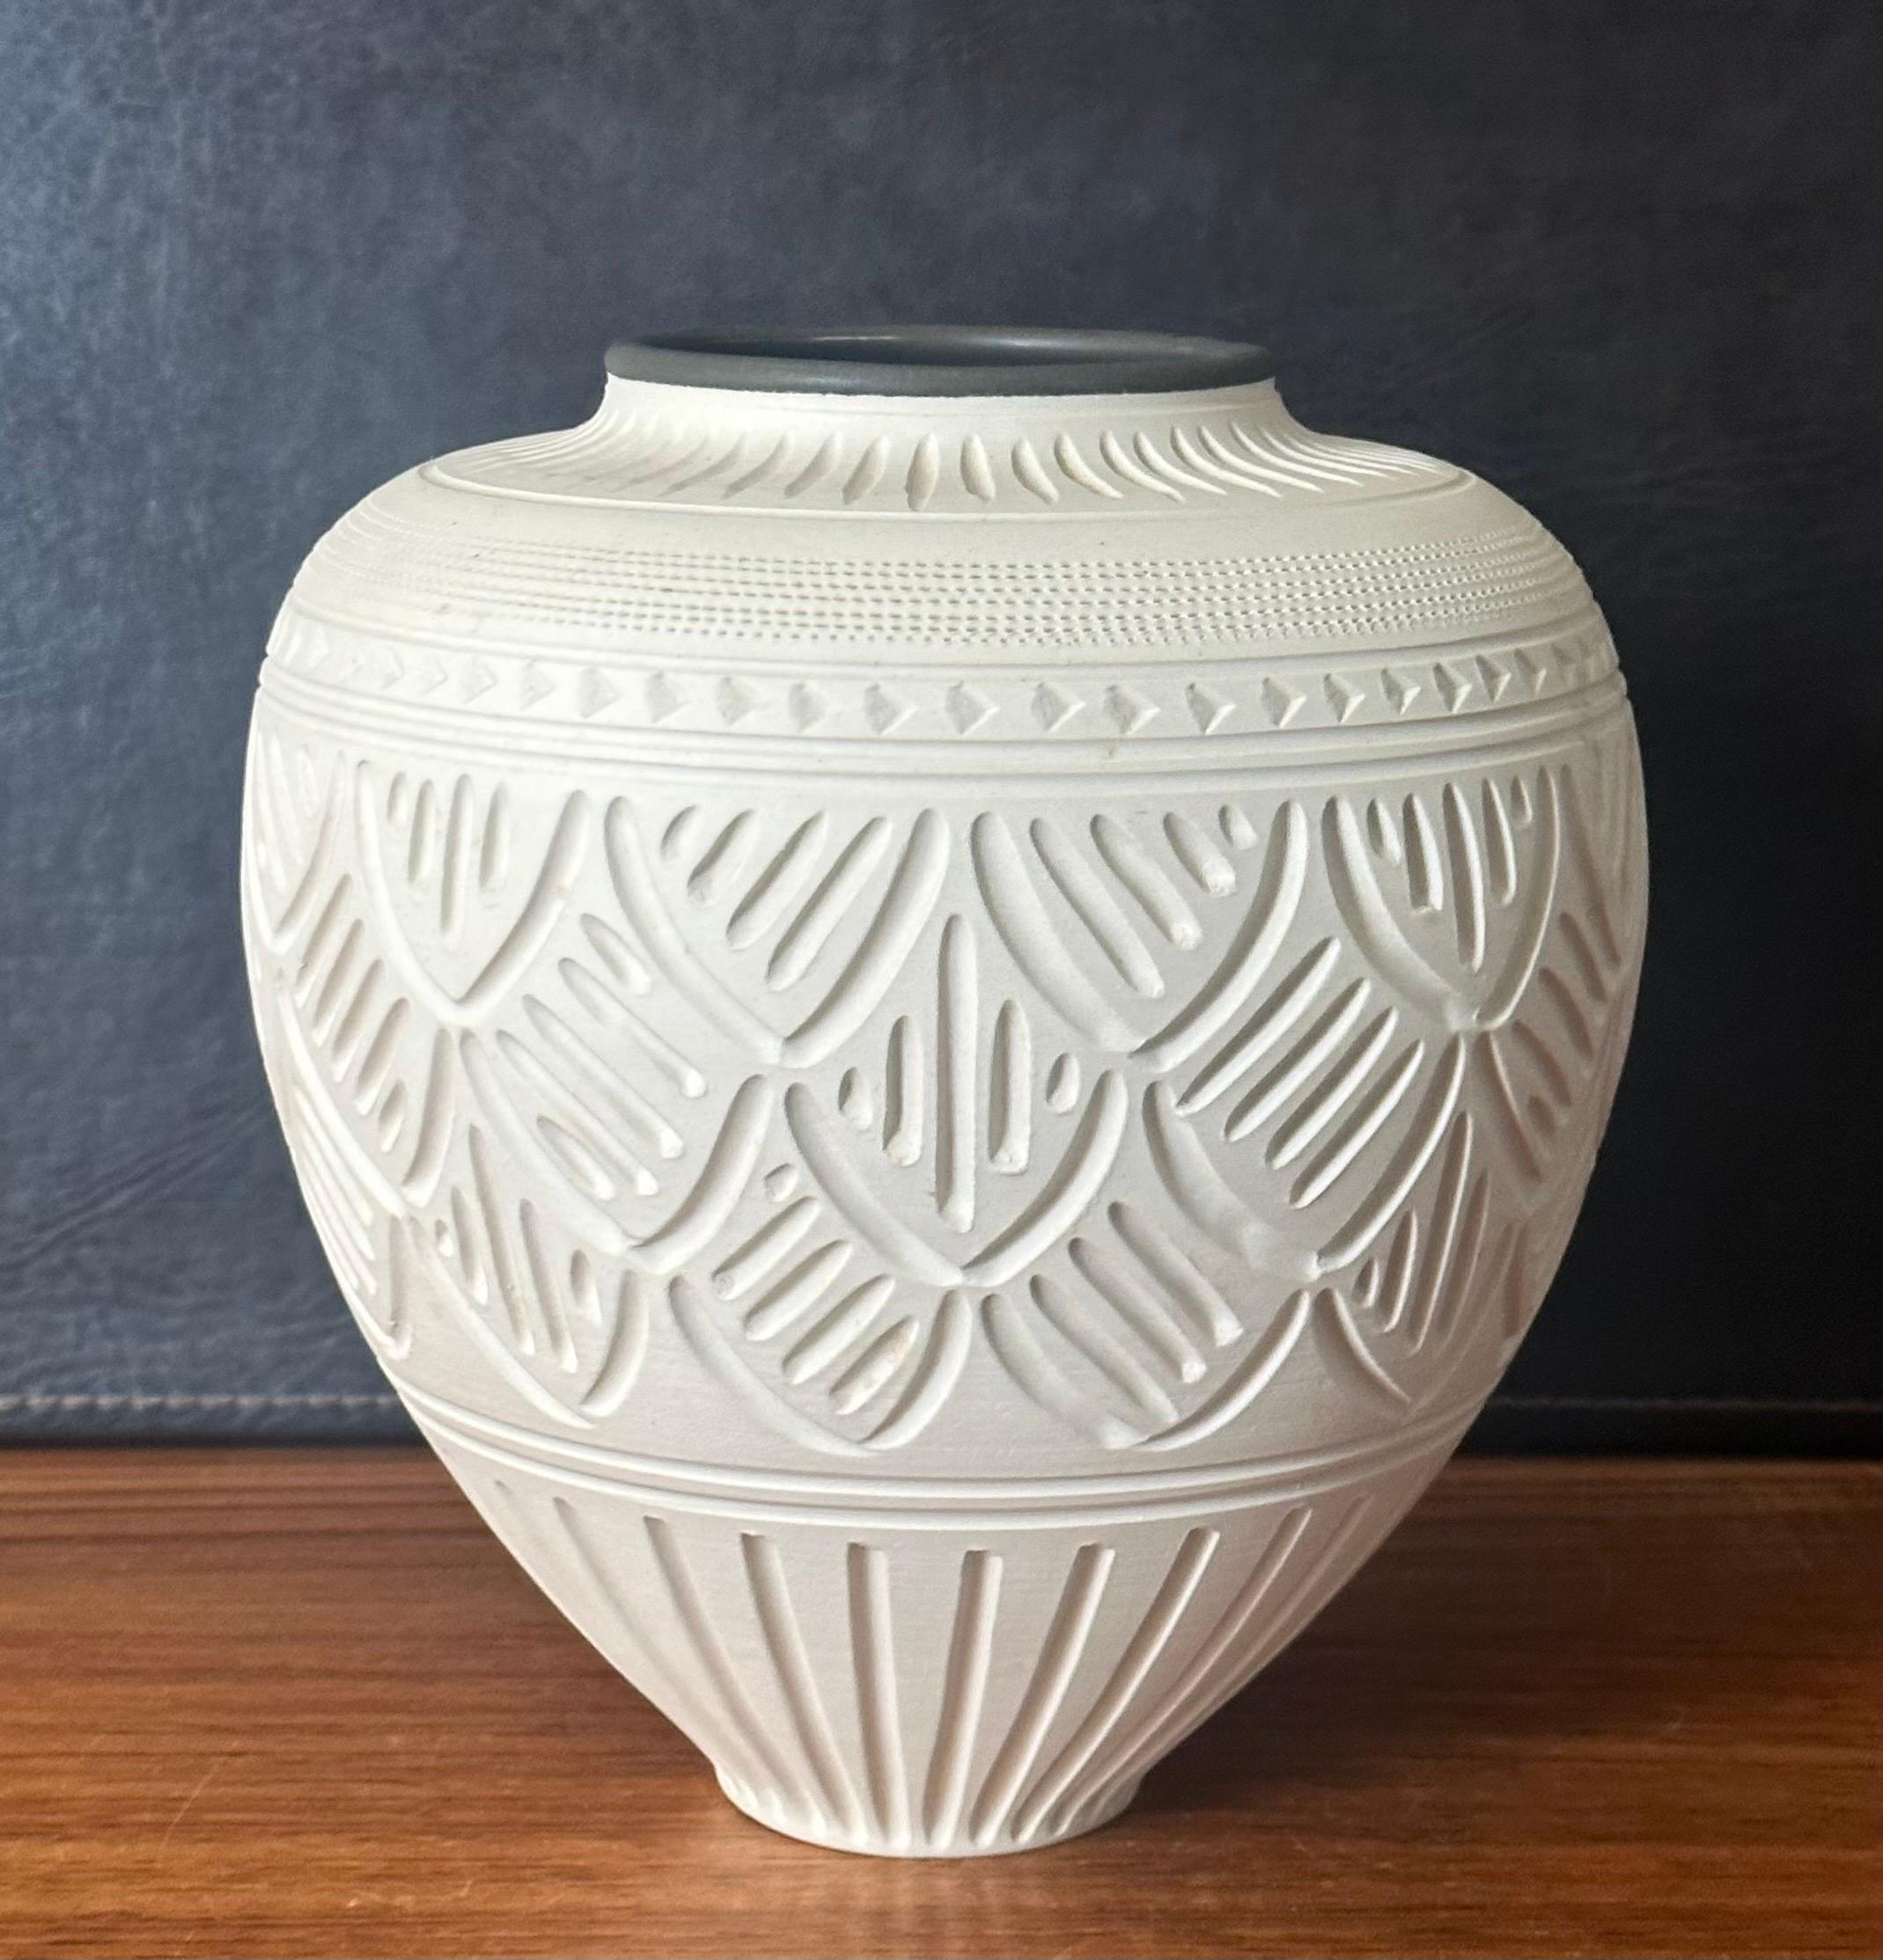 20th Century Incised Geometric Design Bisque Porcelain Vase by Nancy Smith For Sale